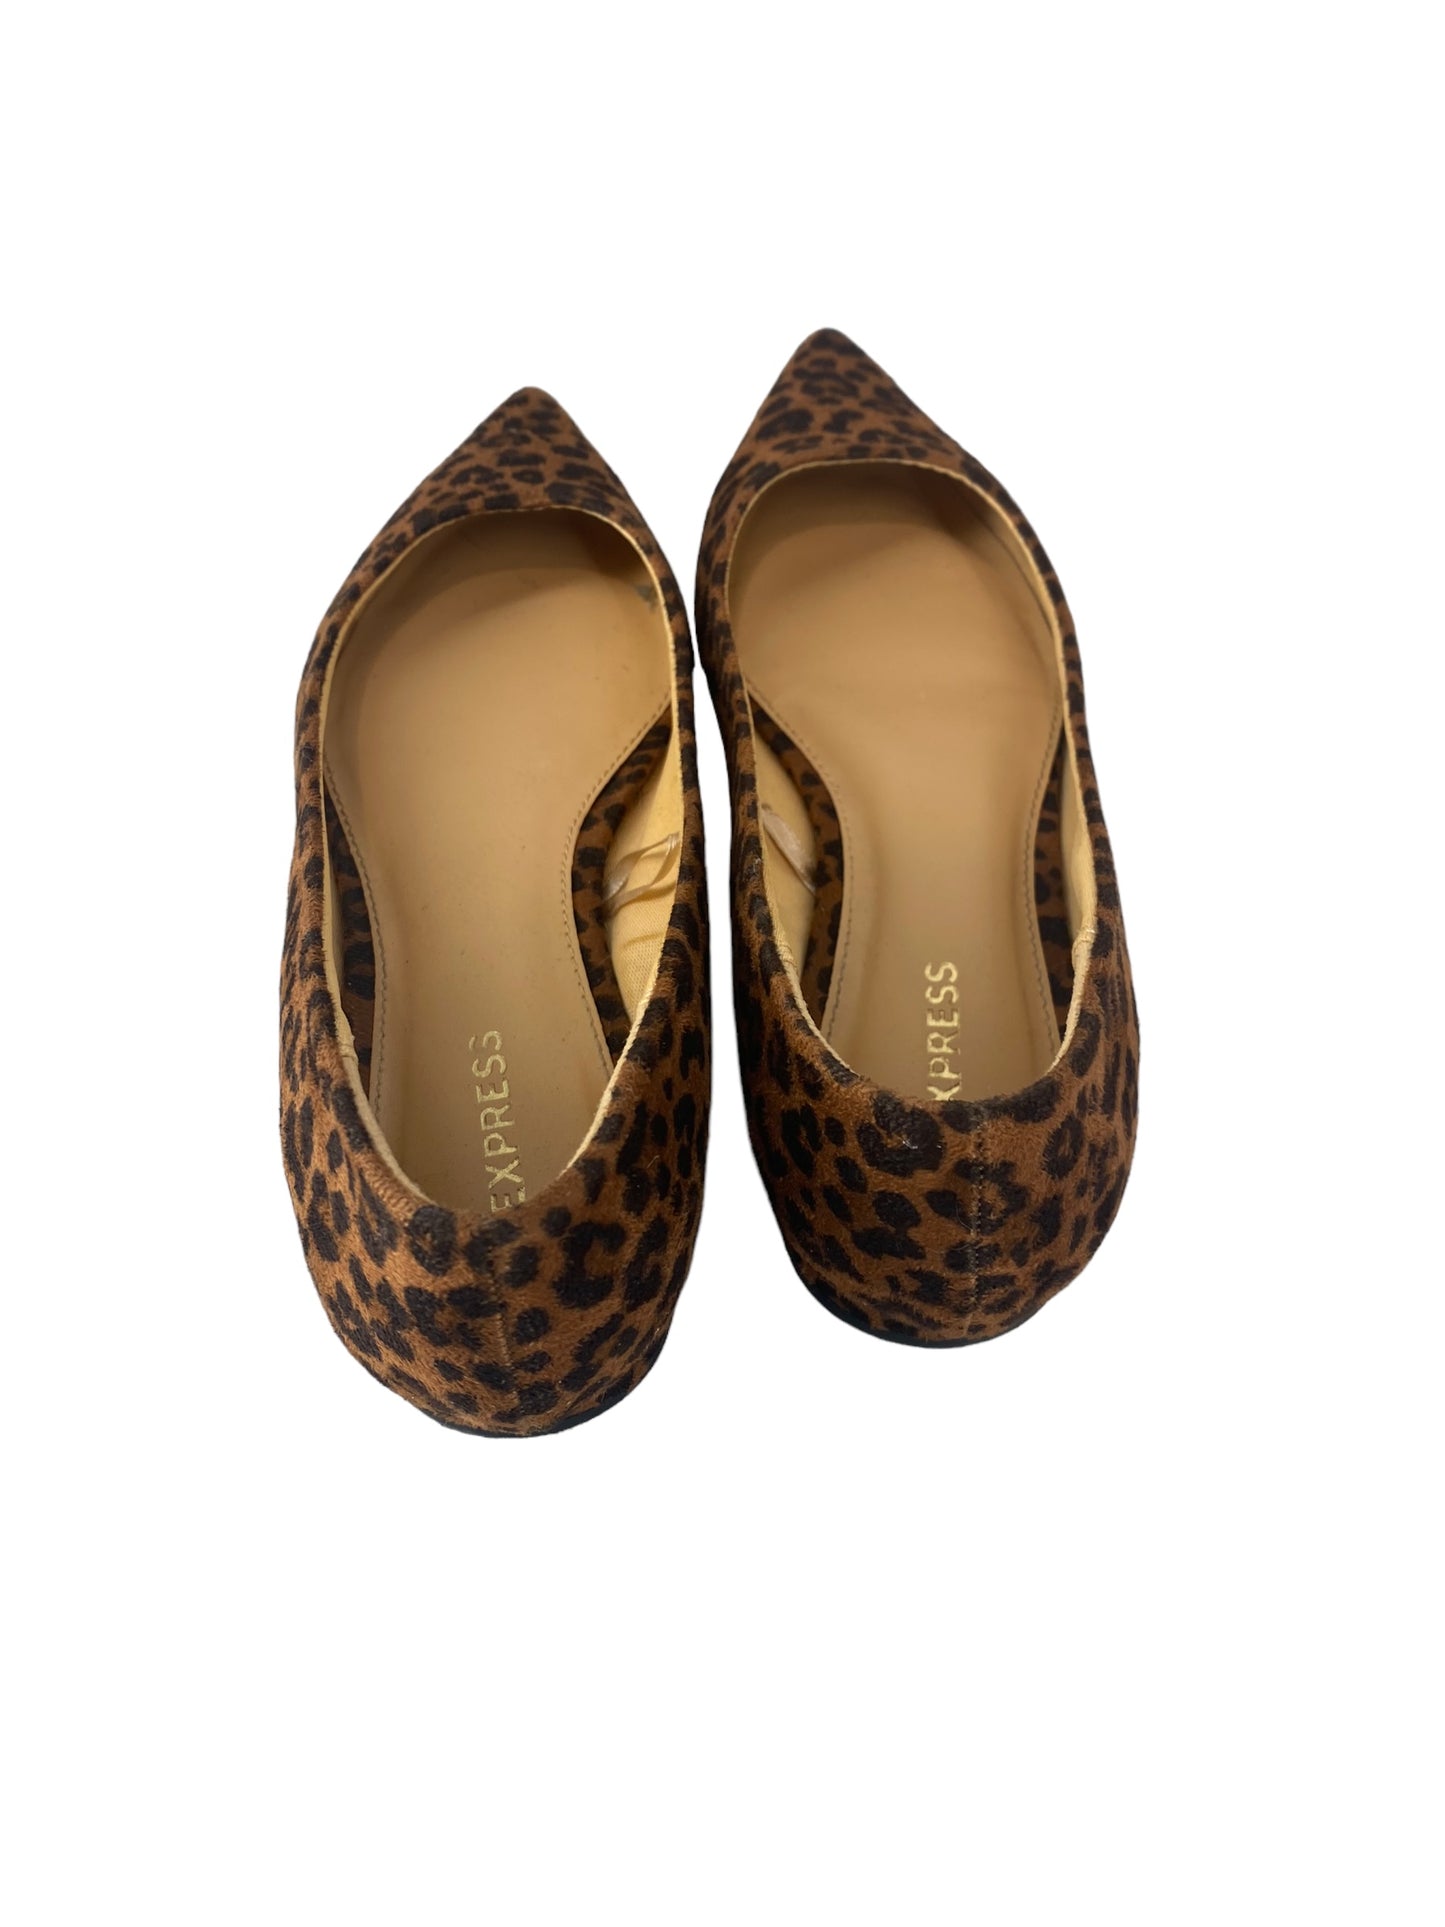 Shoes Flats By Express  Size: 8